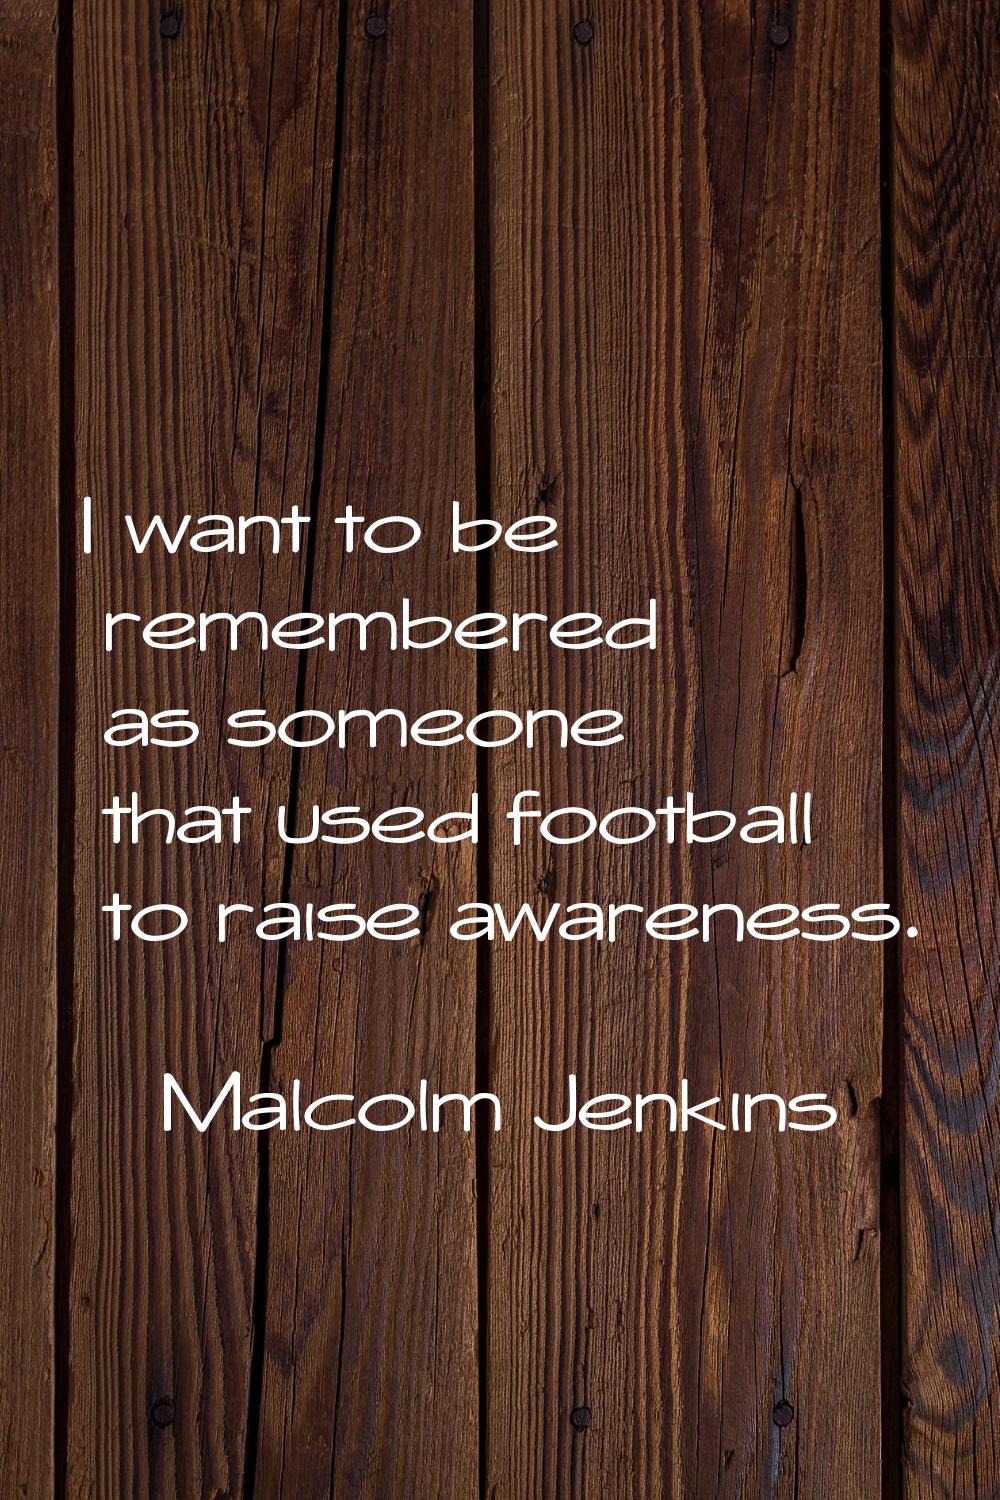 I want to be remembered as someone that used football to raise awareness.